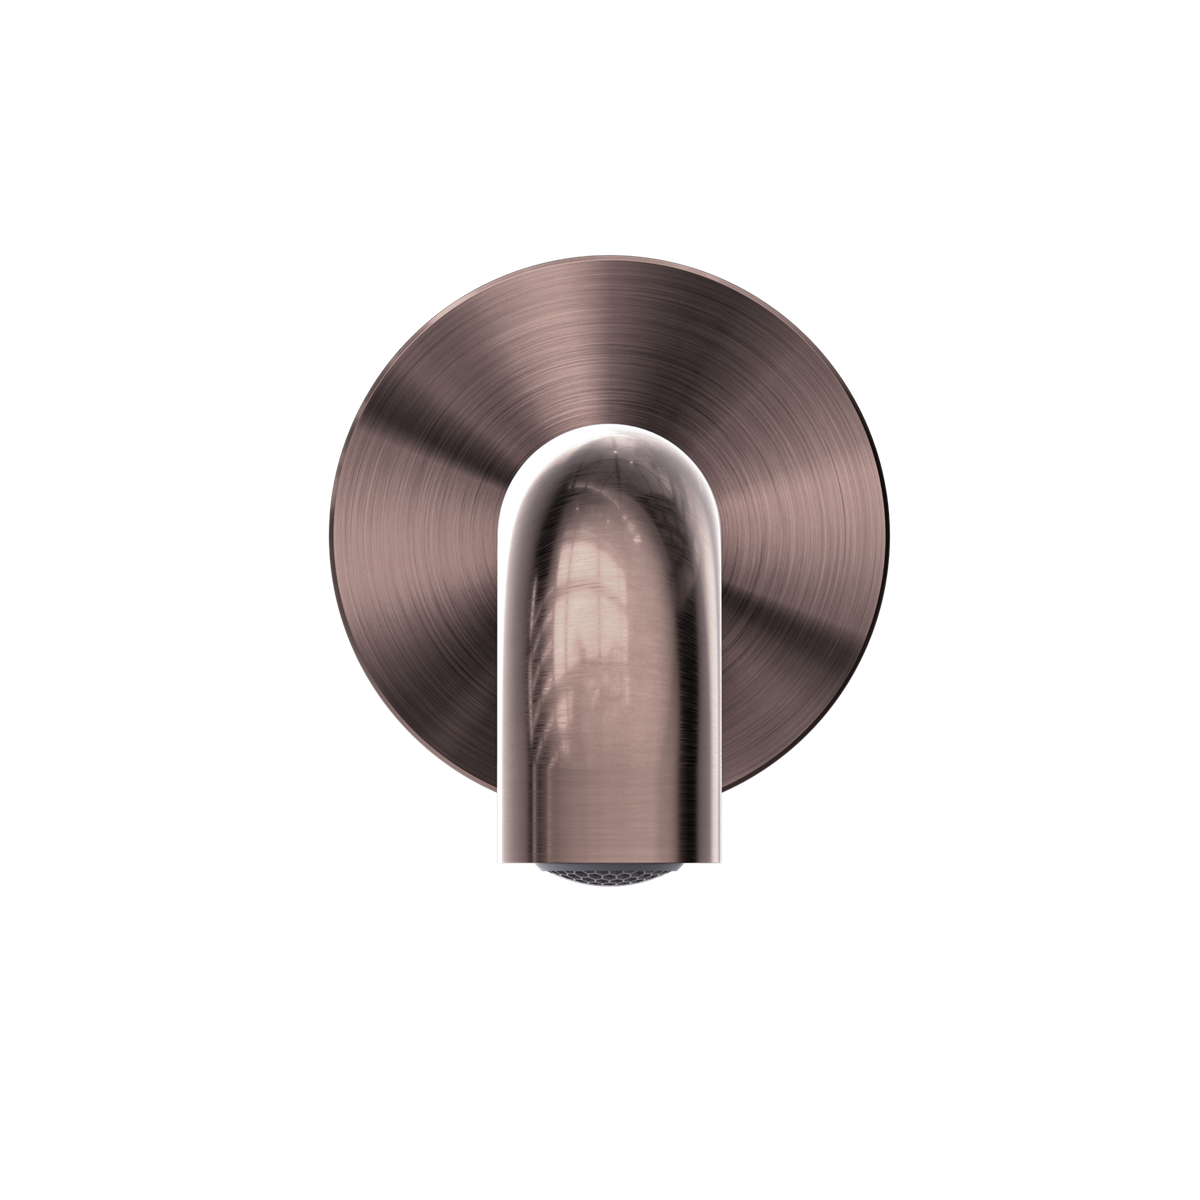 NERO MECCA BASIN/ BATH SPOUT BRUSHED BRONZE (AVAILABLE IN 120MM,160MM,185MM, 230MM AND 260MM)